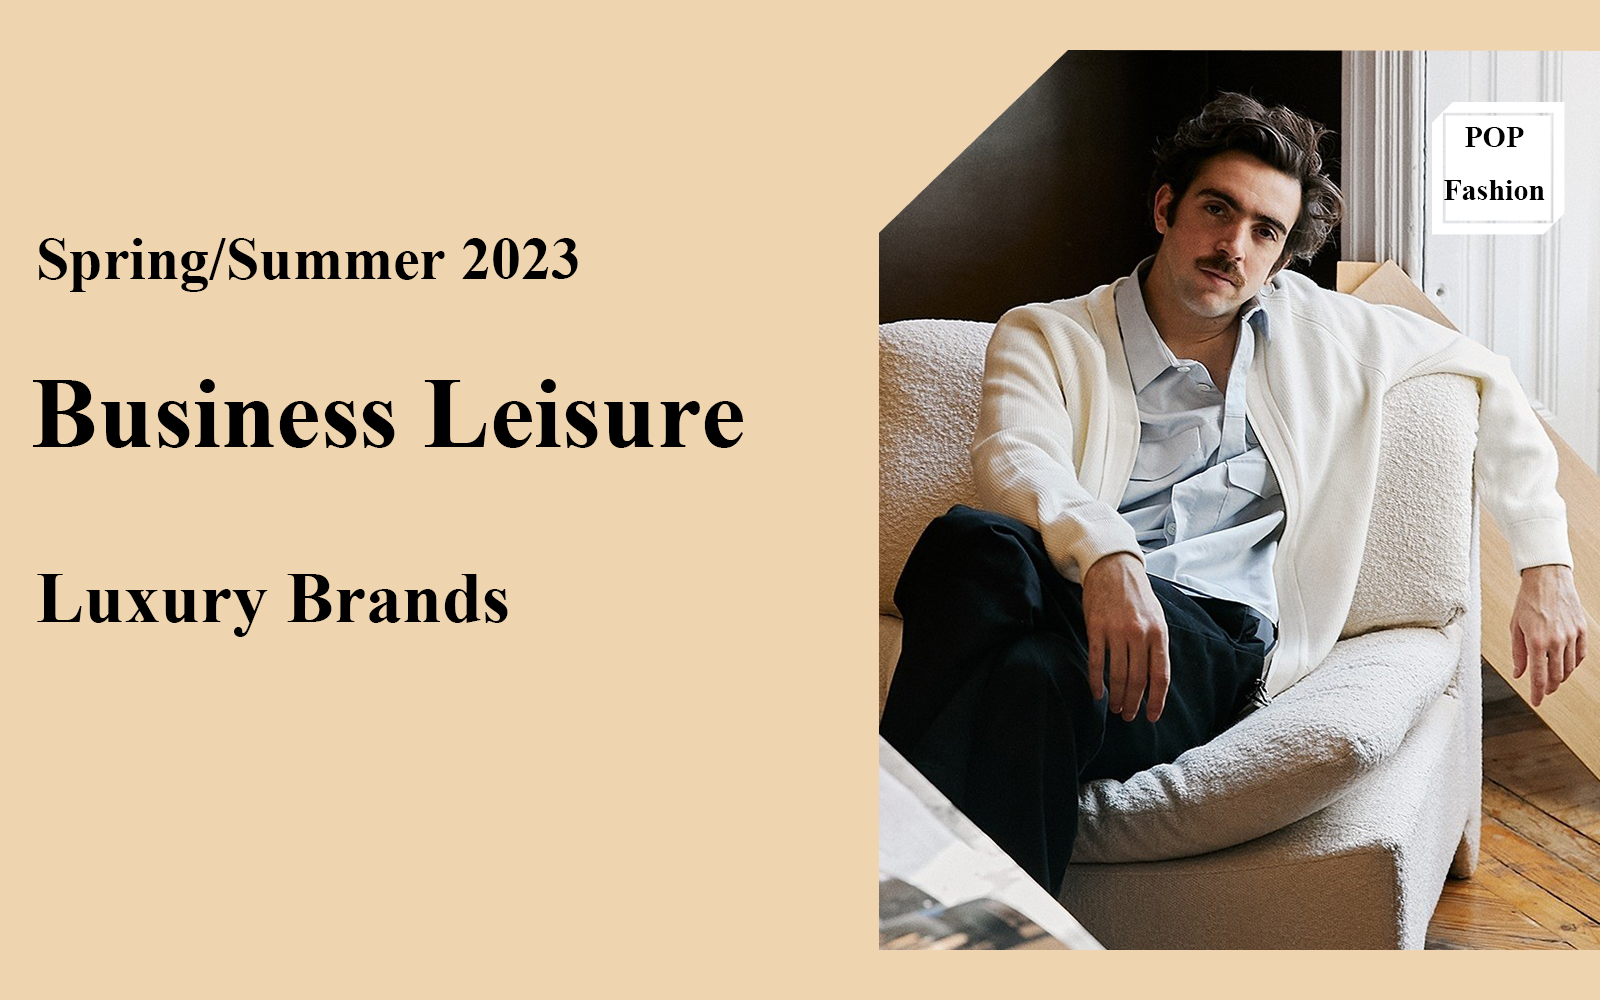 Business Leisure -- The Comprehensive Analysis of Luxury Men's Knitwear Brand